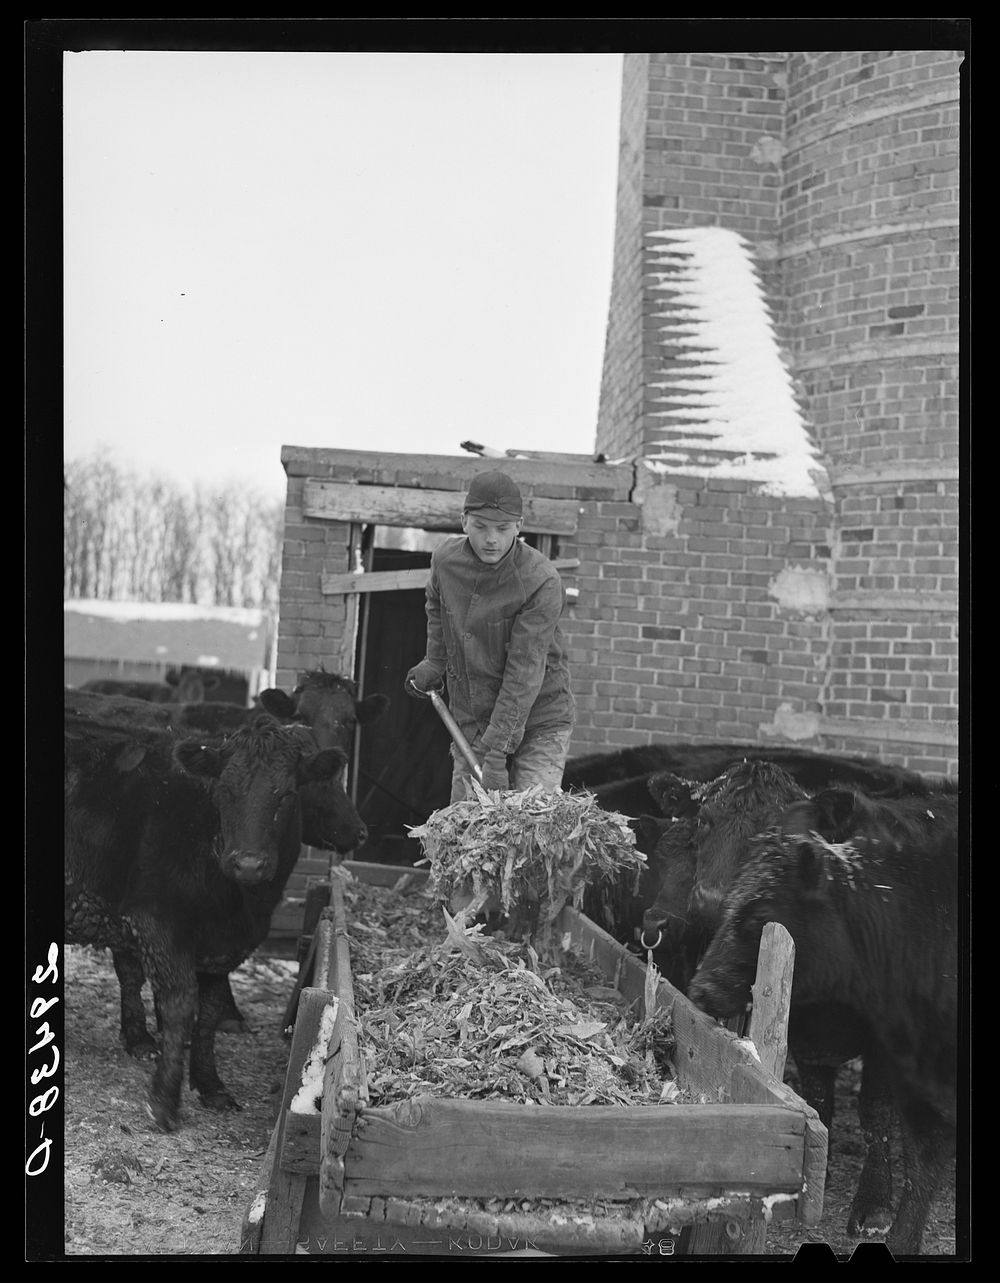 Feeding cattle. Grundy County, Iowa. Sourced from the Library of Congress.